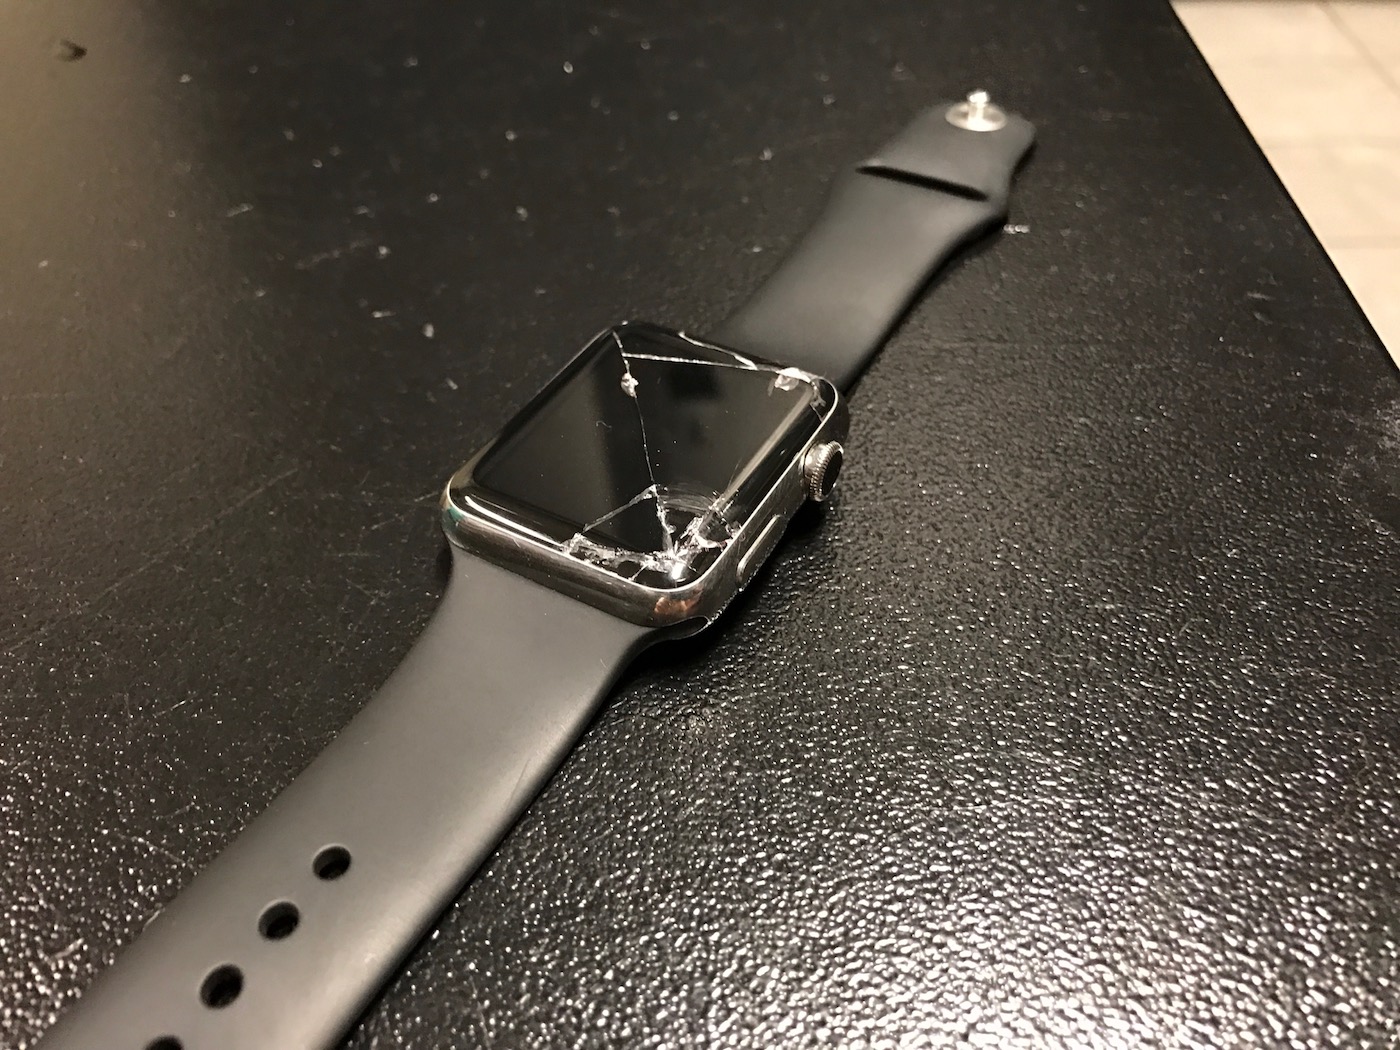 Smashed Apple Watch